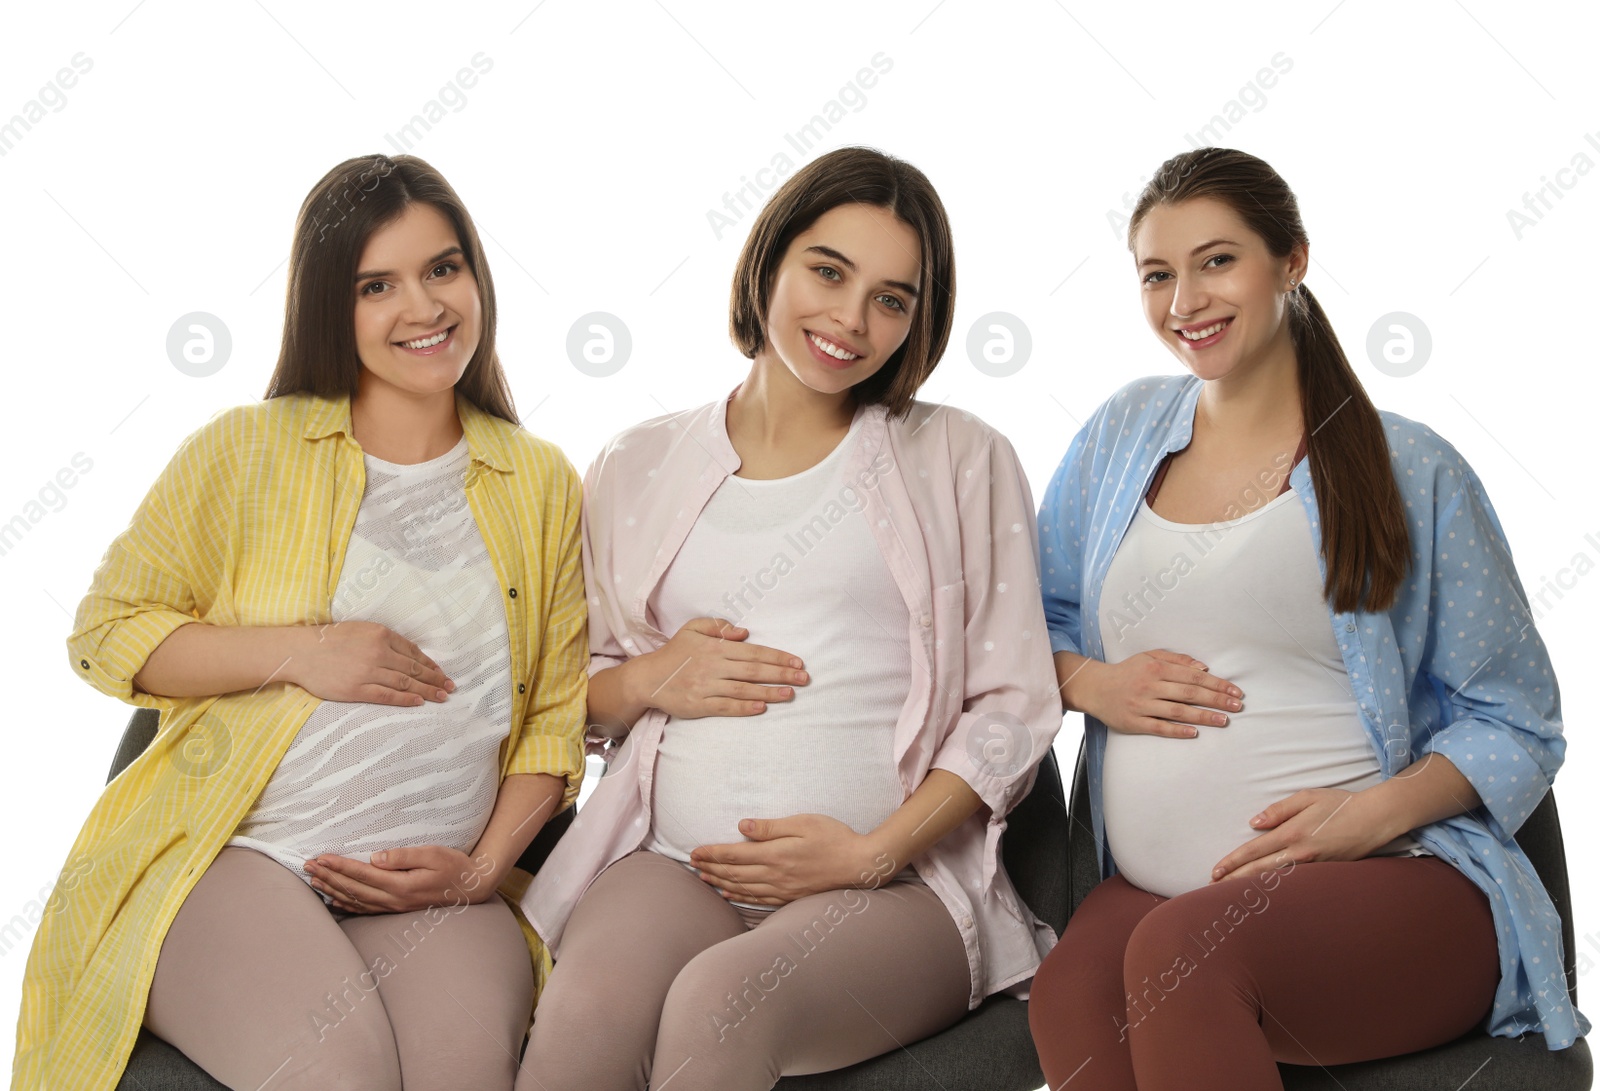 Photo of Happy pregnant women sitting on chairs against white background